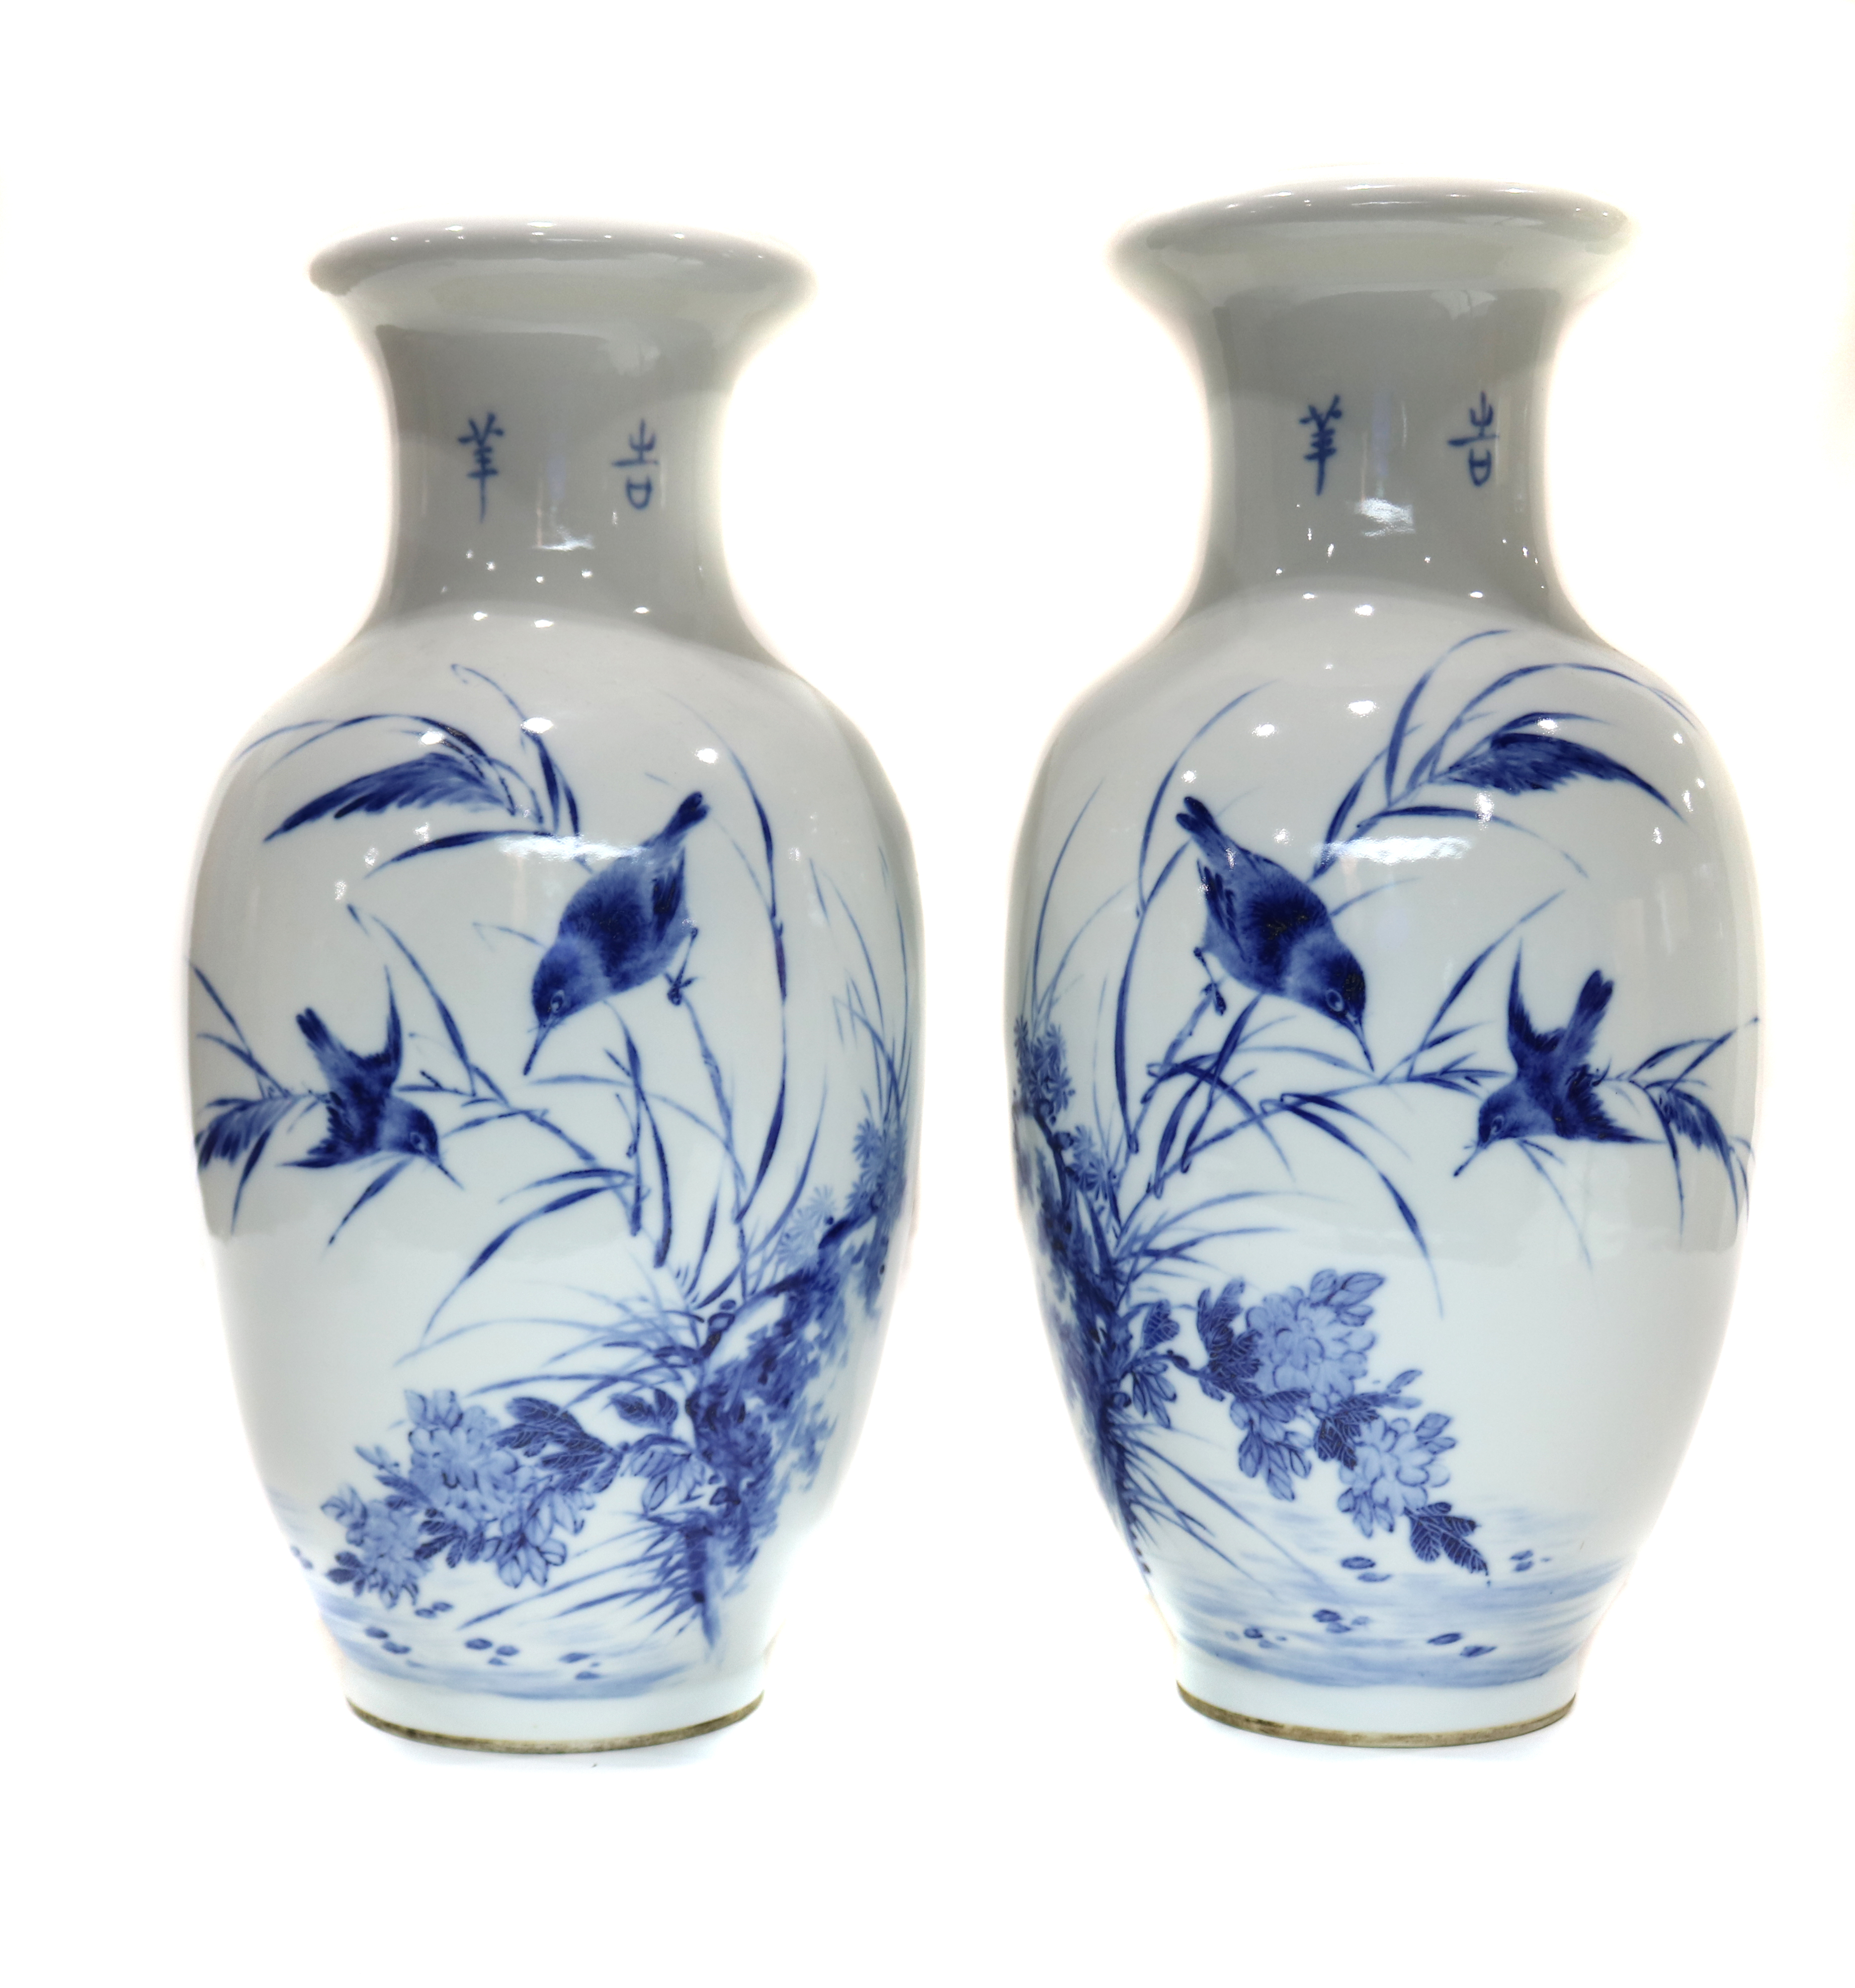  LOT OF 2 PAIR OF CHINESE BLUE 3a656b